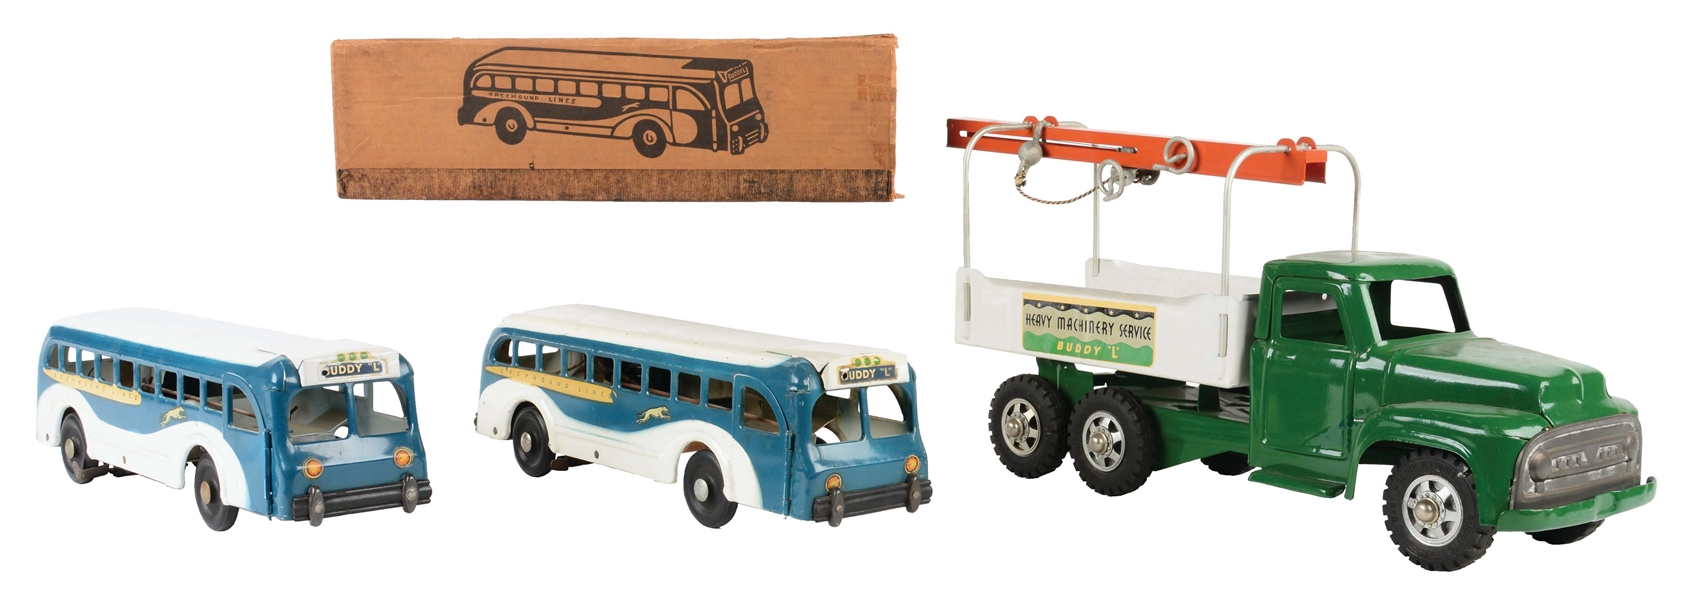 LOT OF 3: BUDDY L GREYHOUND BUSES AND TRUCK.